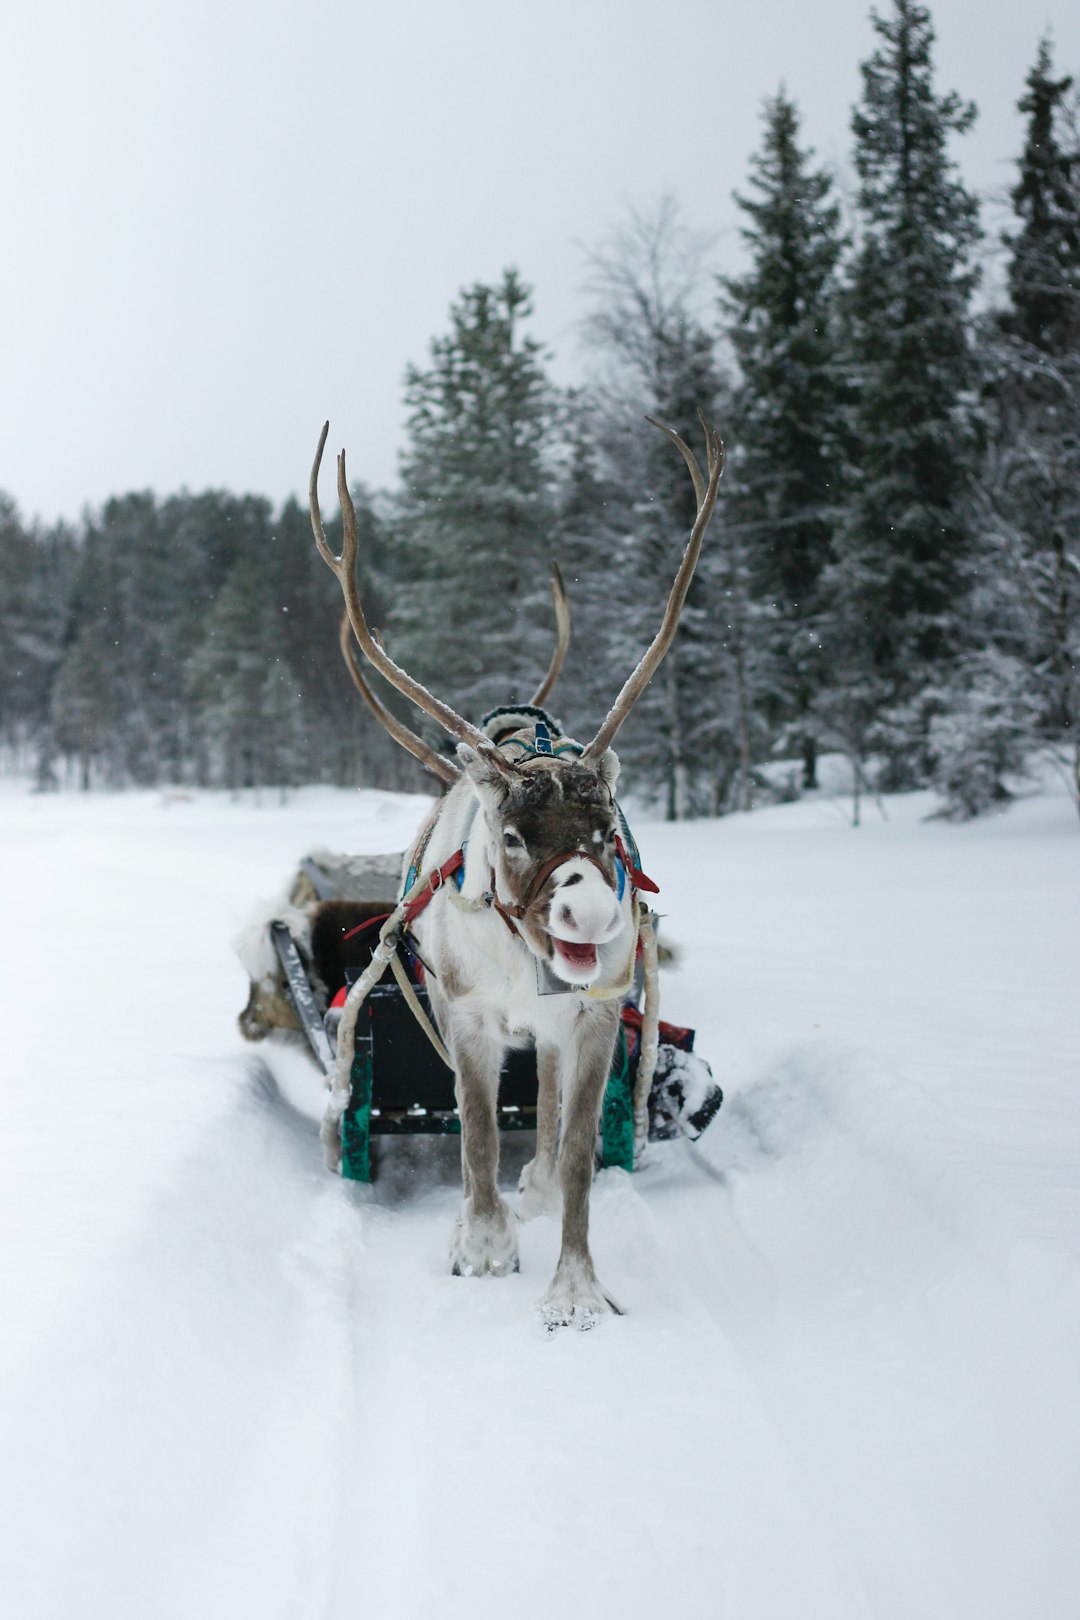 How Rudolph The Emergency Management Reindeer Saved Christmas